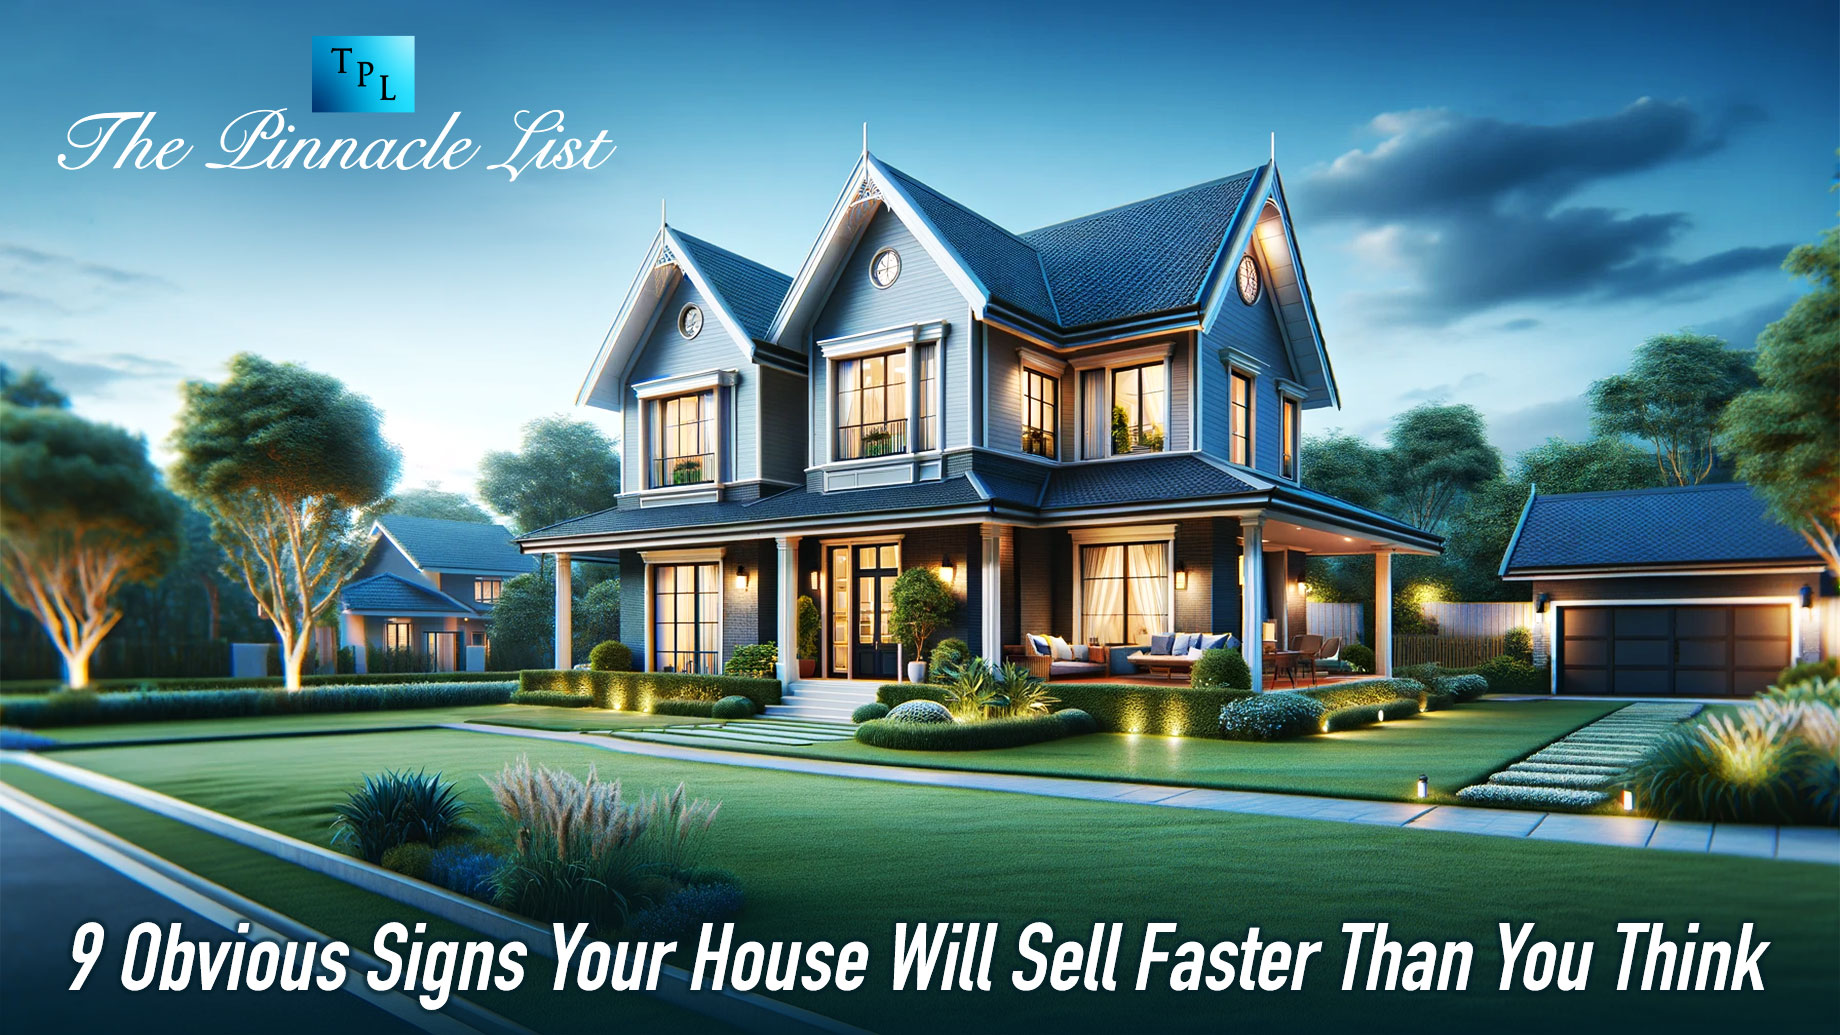 9 Obvious Signs Your House Will Sell Faster Than You Think